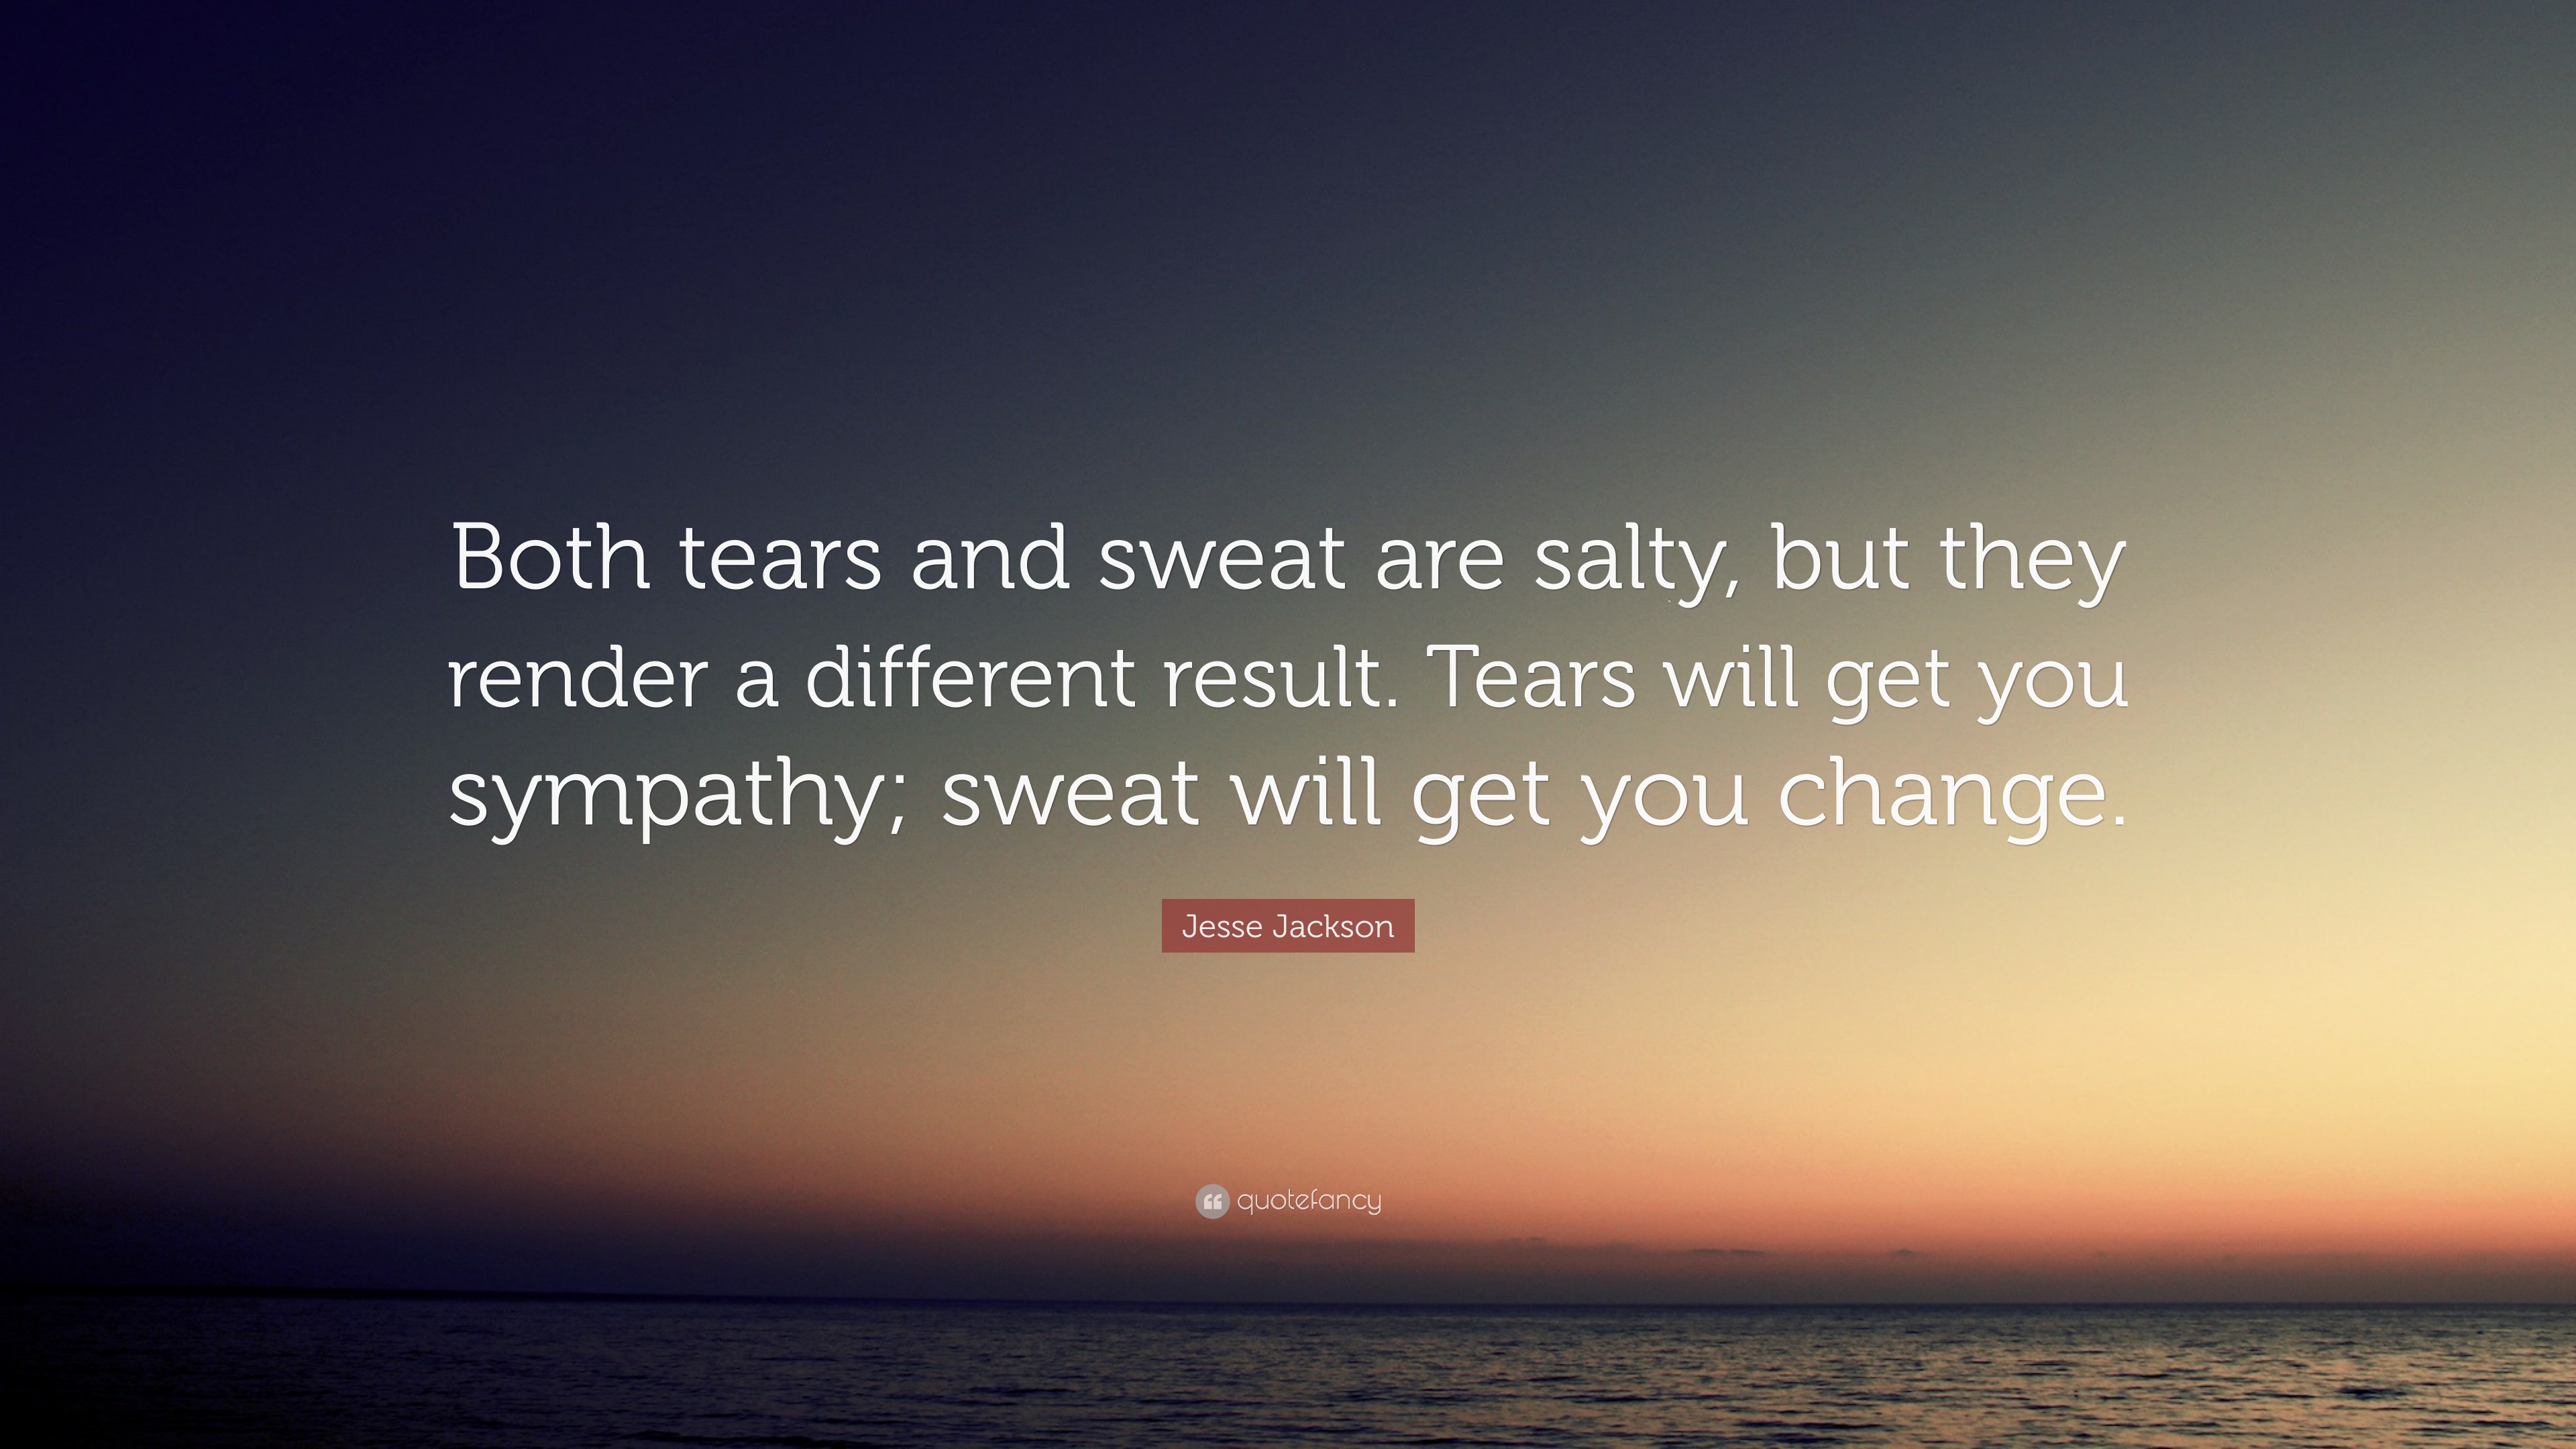 Why Are Tears Salty?